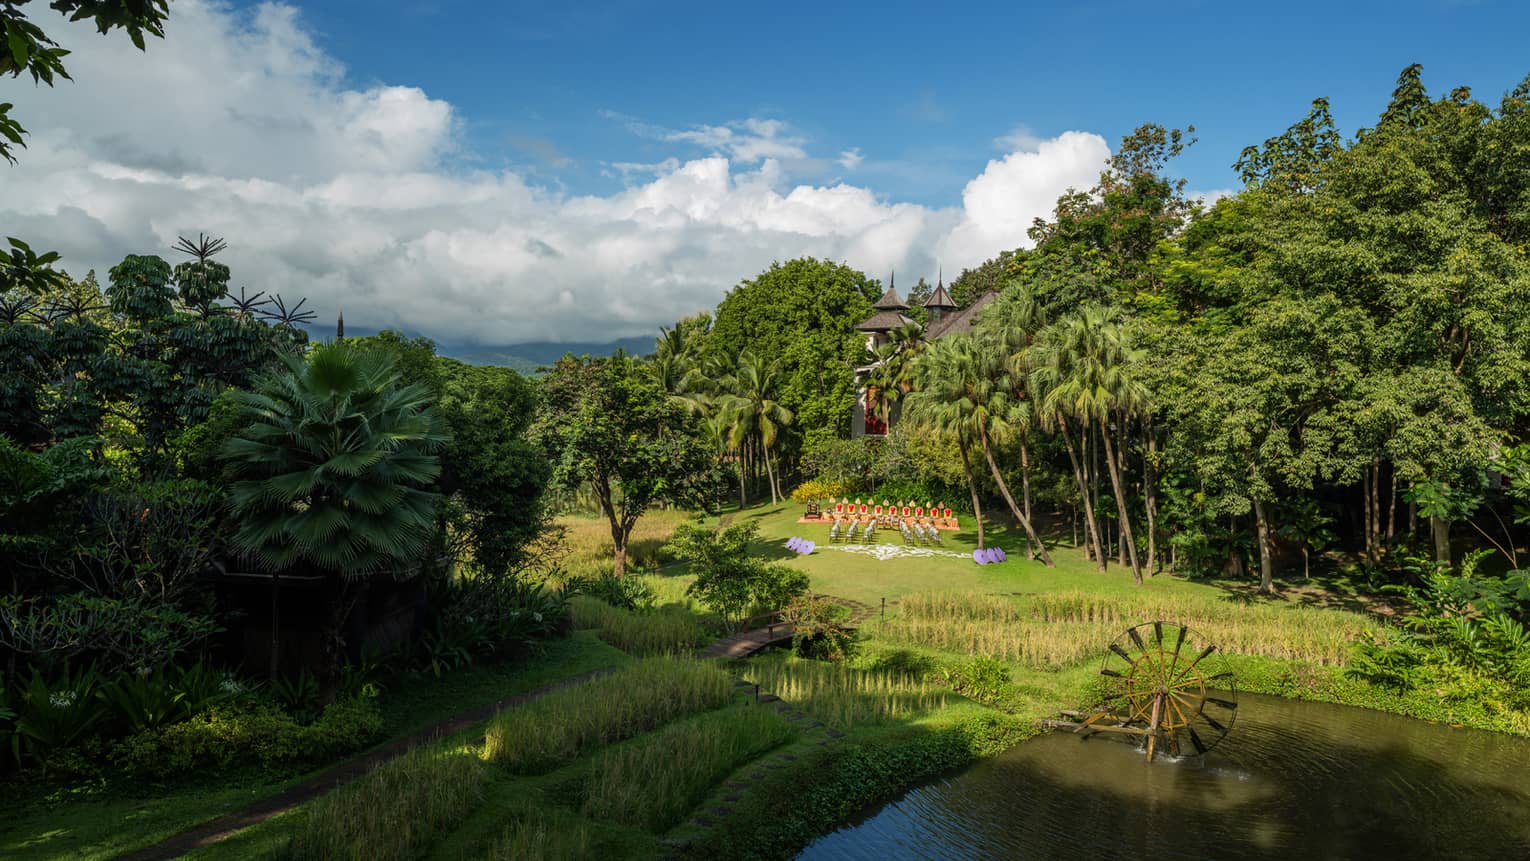 View over green rice fields, lawn, tropical gardens